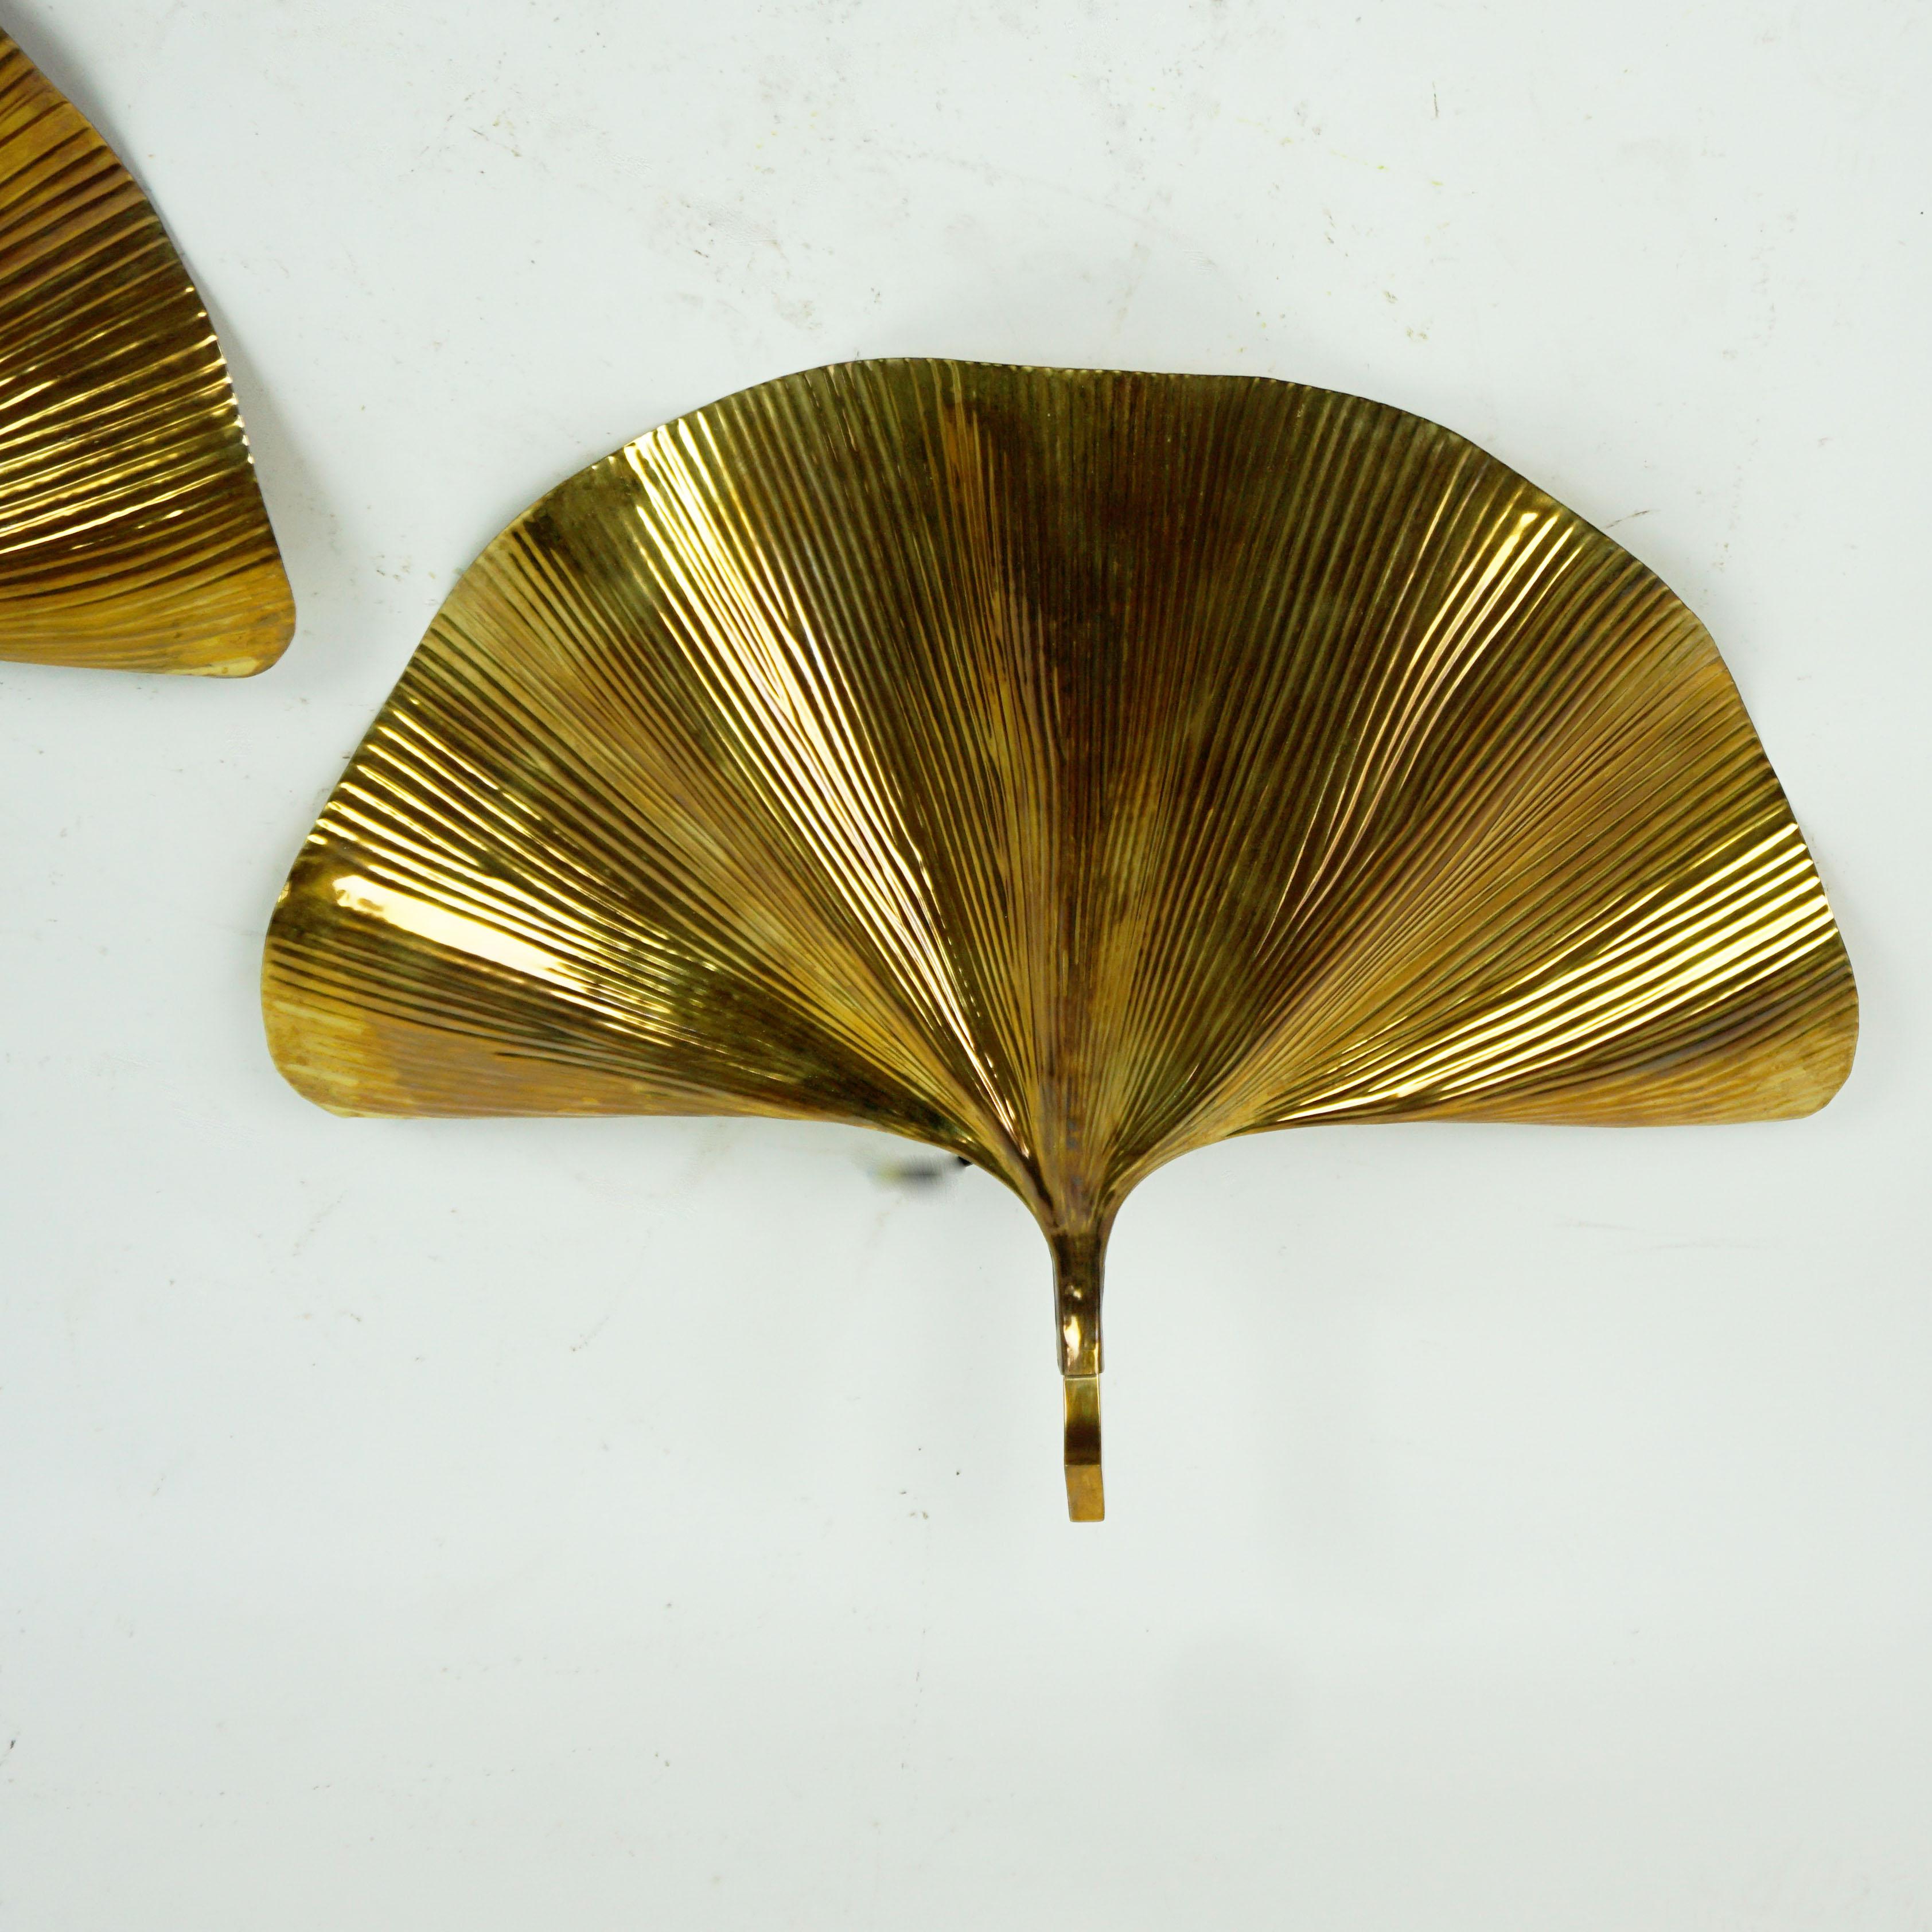 This magnificant sculptural and Large brass wall lamps or sconces have been designed by Carlo Giorgio for Bottega Gadda, Italy 1970s. Sometimes they are also attributed to Tommaso Barbi.
Their shape is inspired by the beautiful Ginkgo leaf . Both